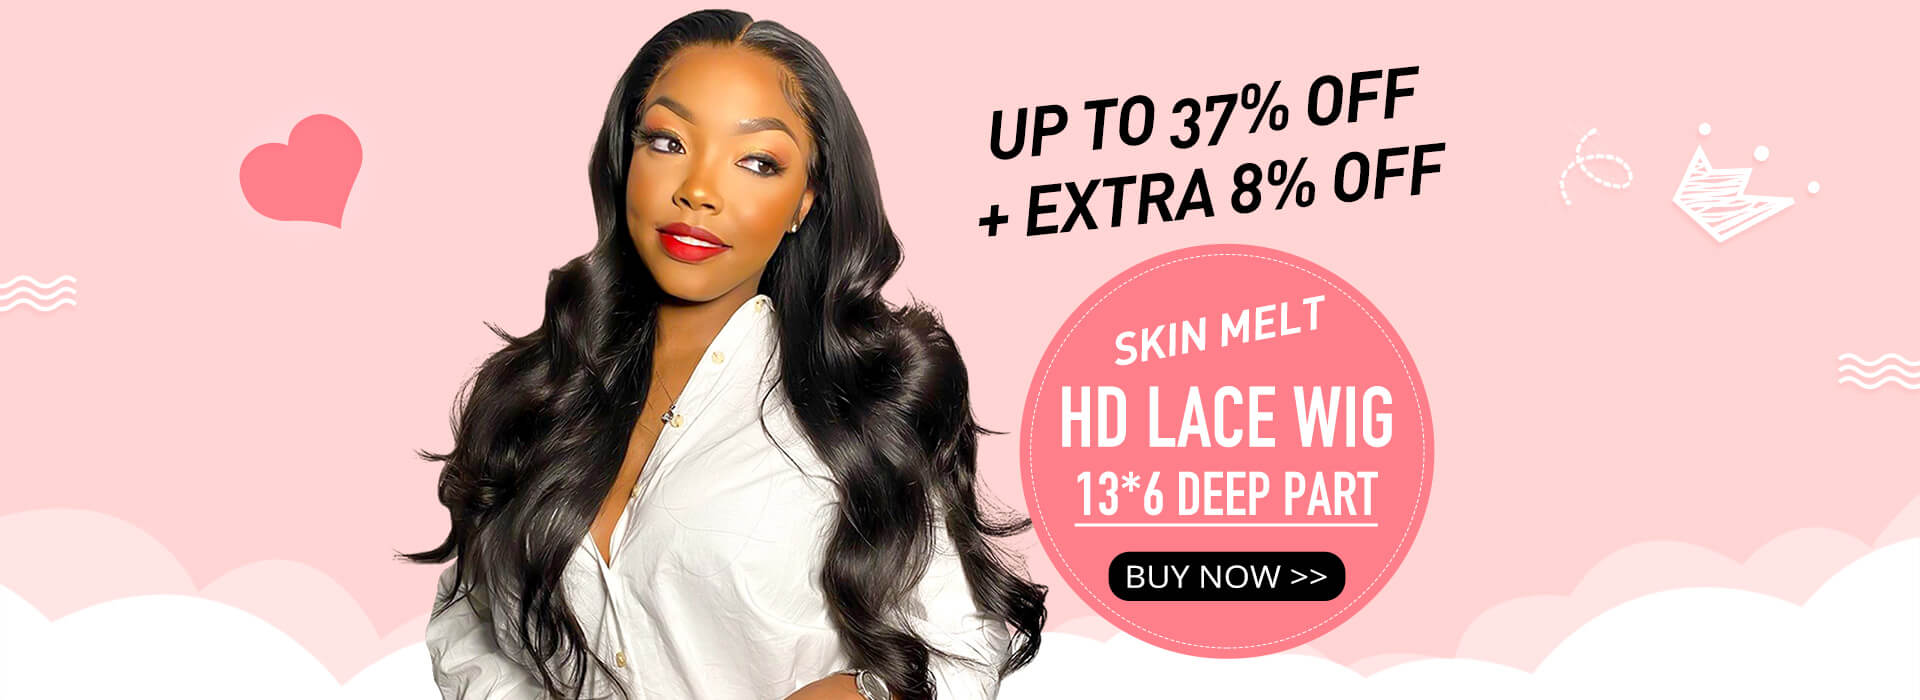 hd lace wigs body wave lace front wigs